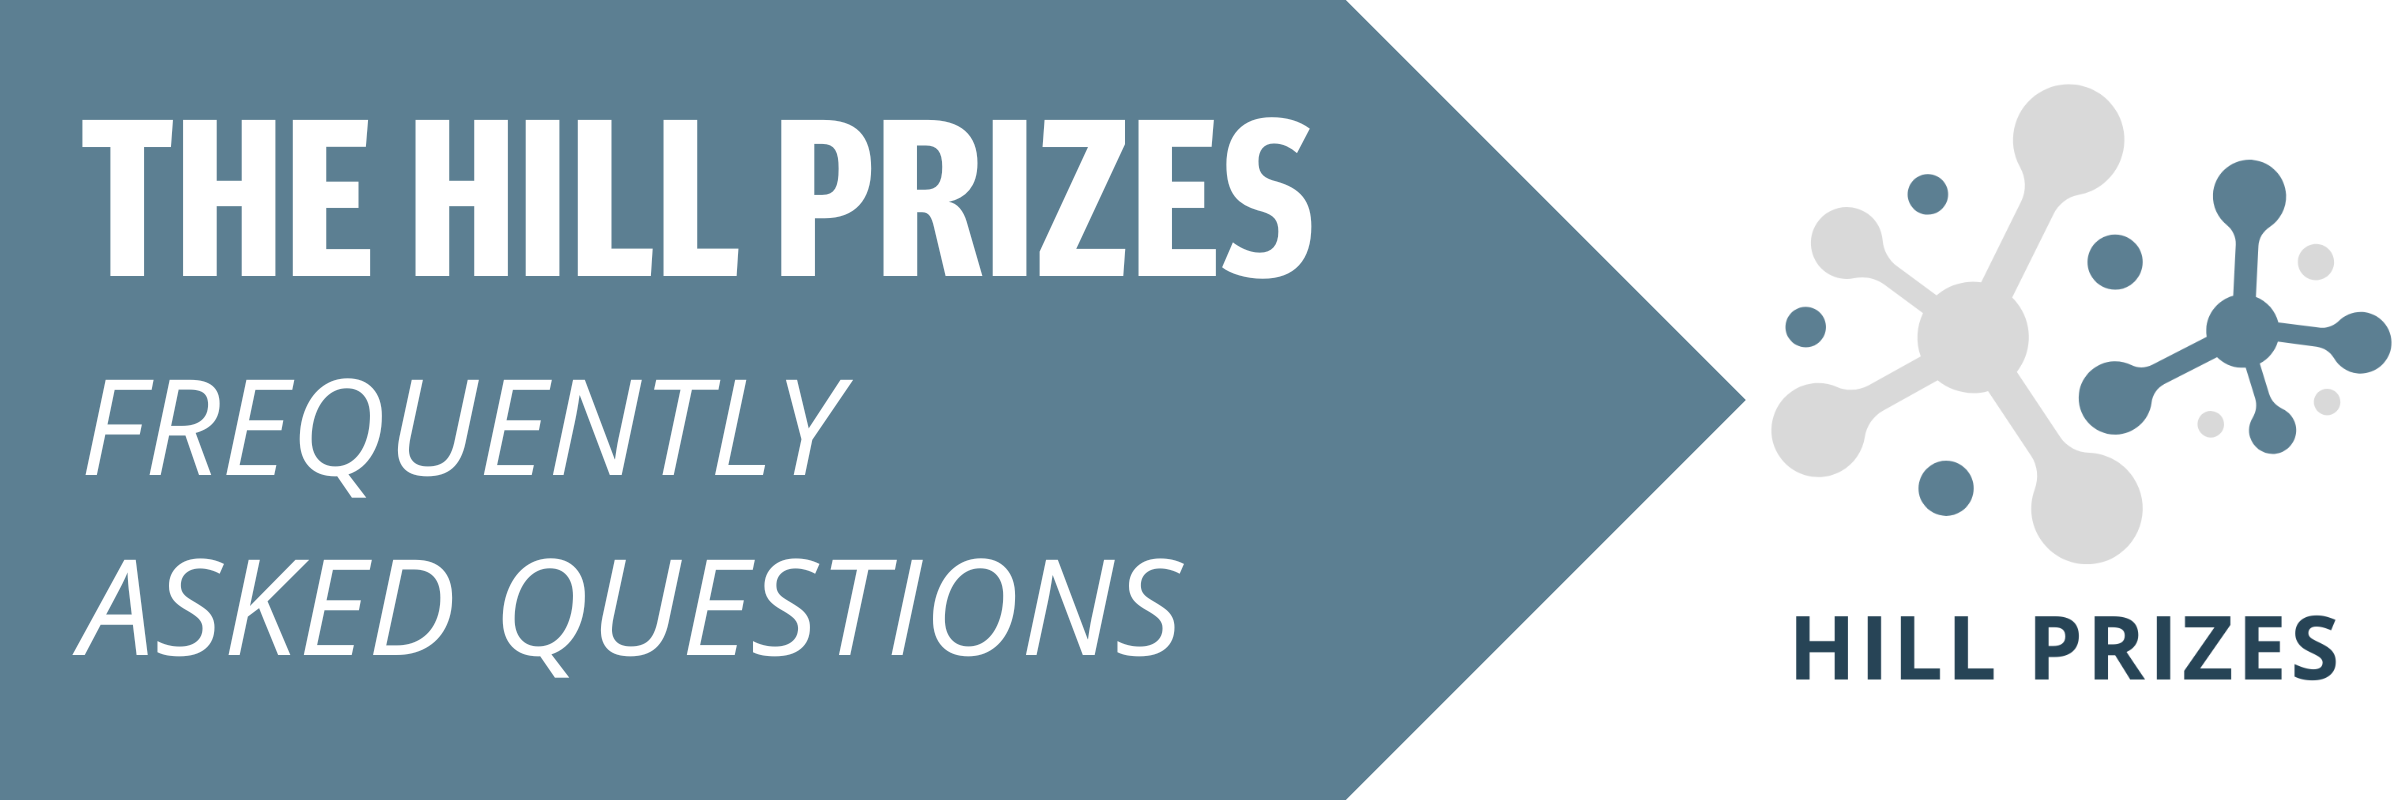 Hill Prizes Frequently Asked Questions